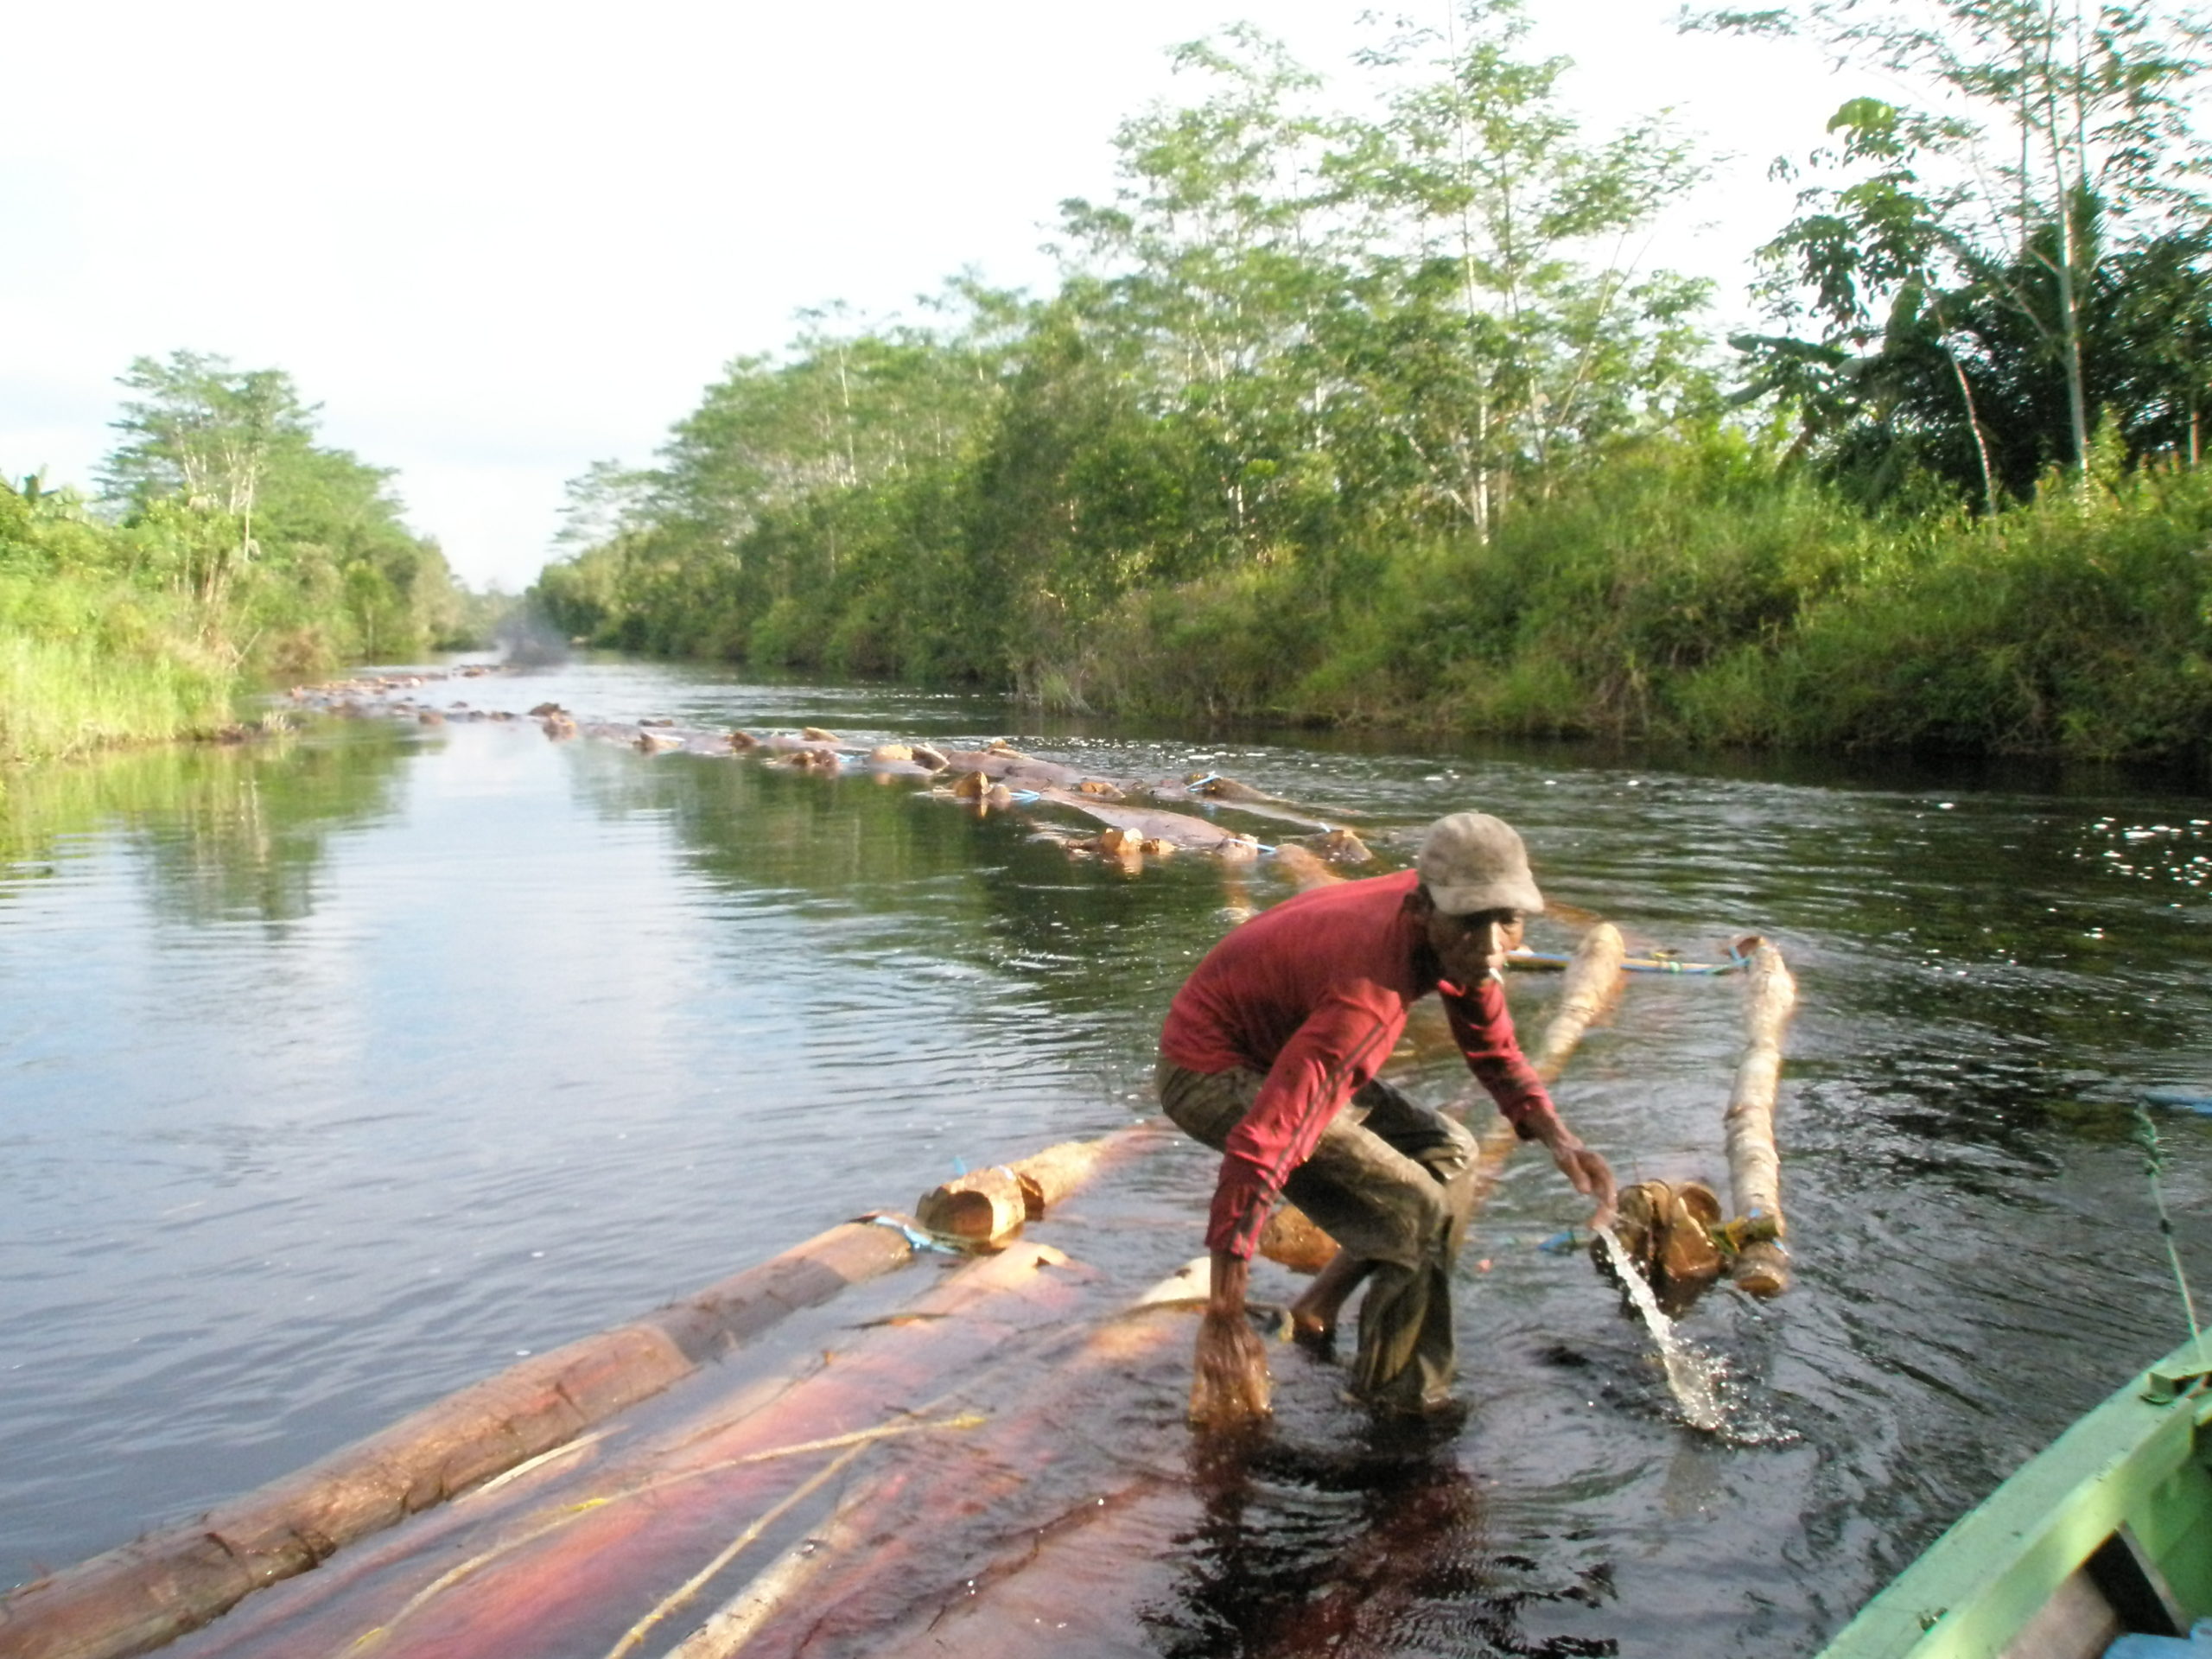 A man transport logs in a canal in Indonesia